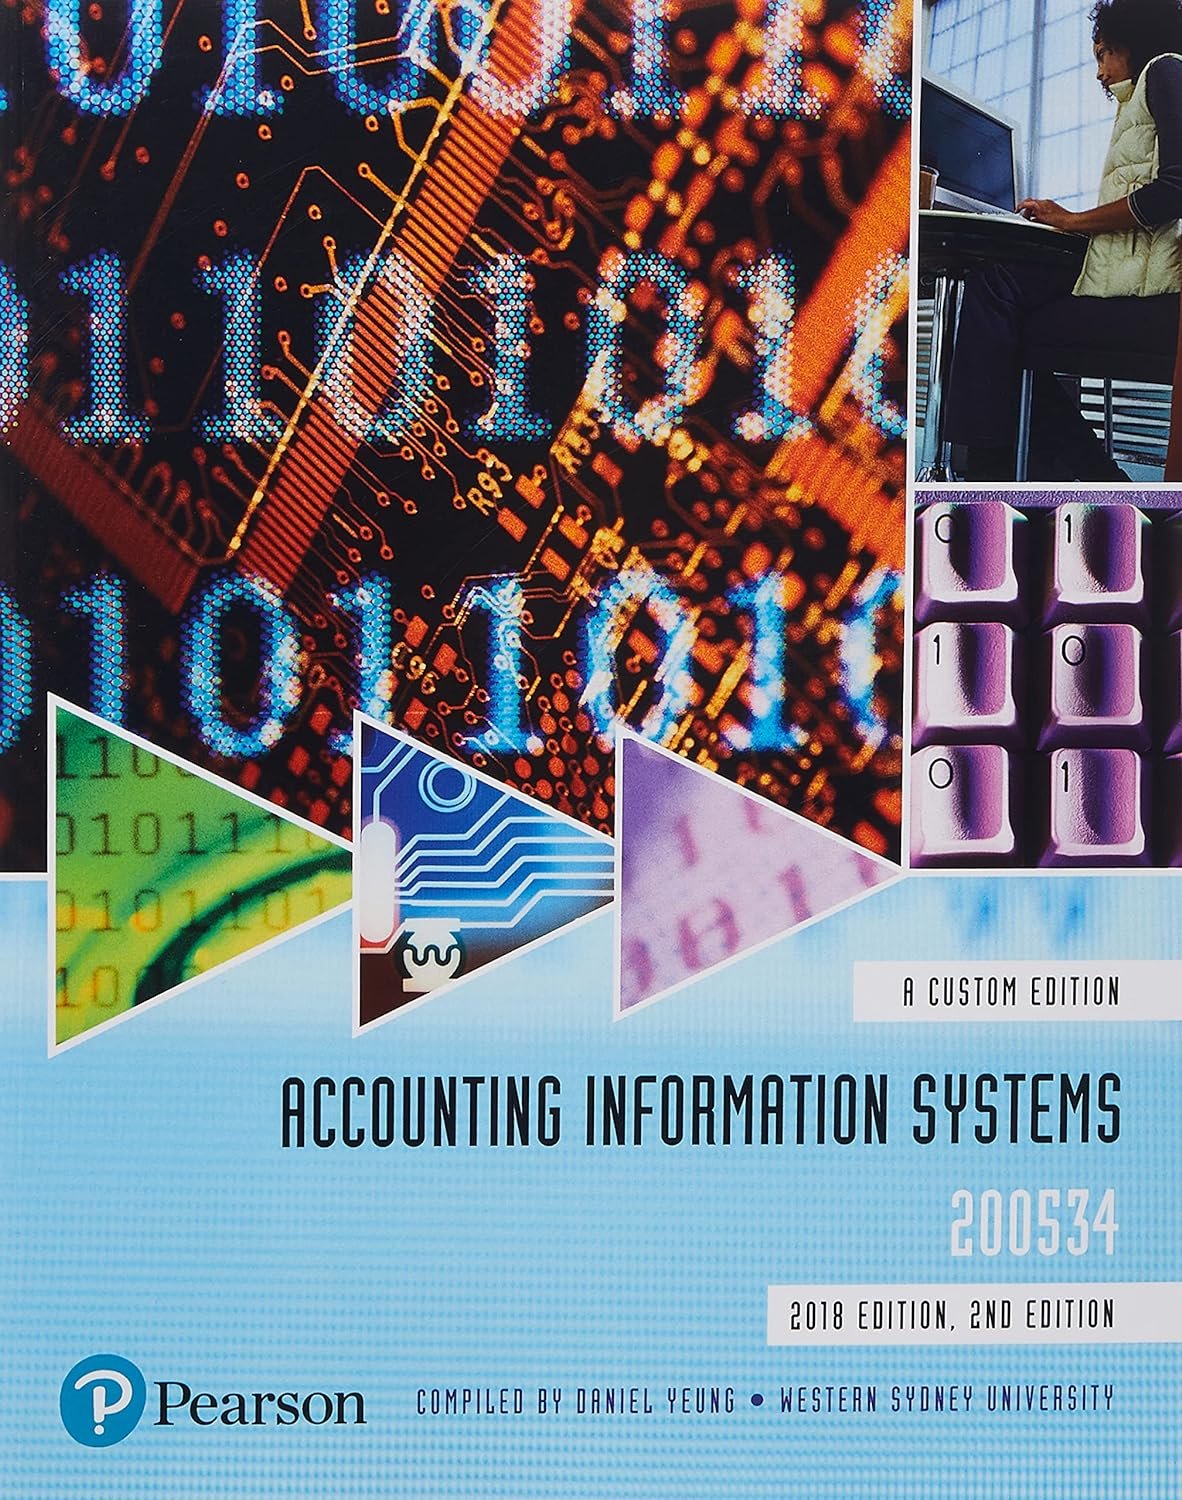 Accounting Information Systems 200534 (Custom Edition)